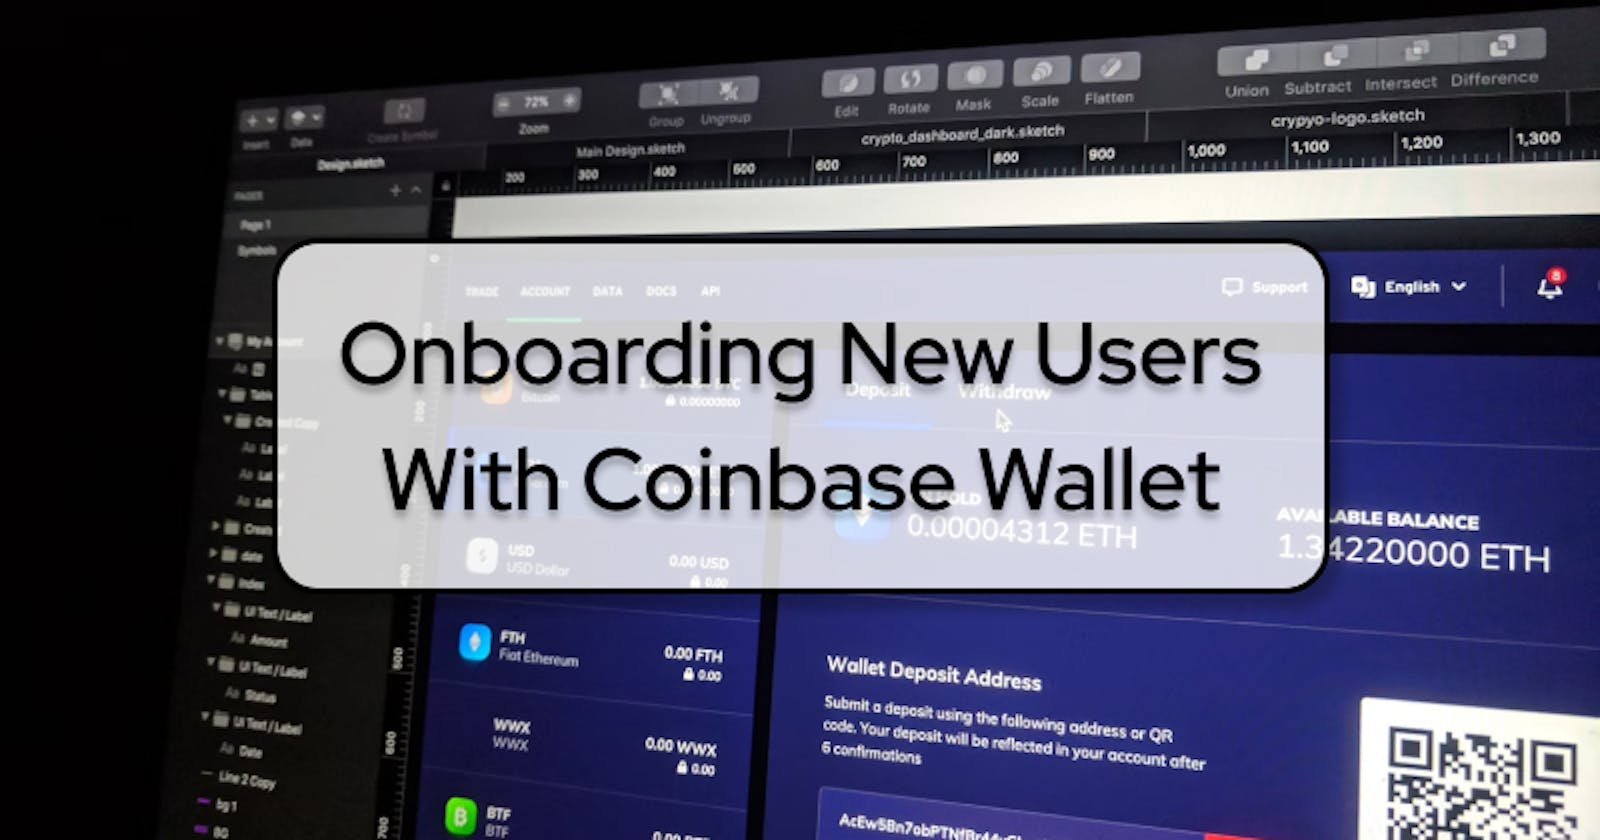 Onboarding New Users With Coinbase Wallet